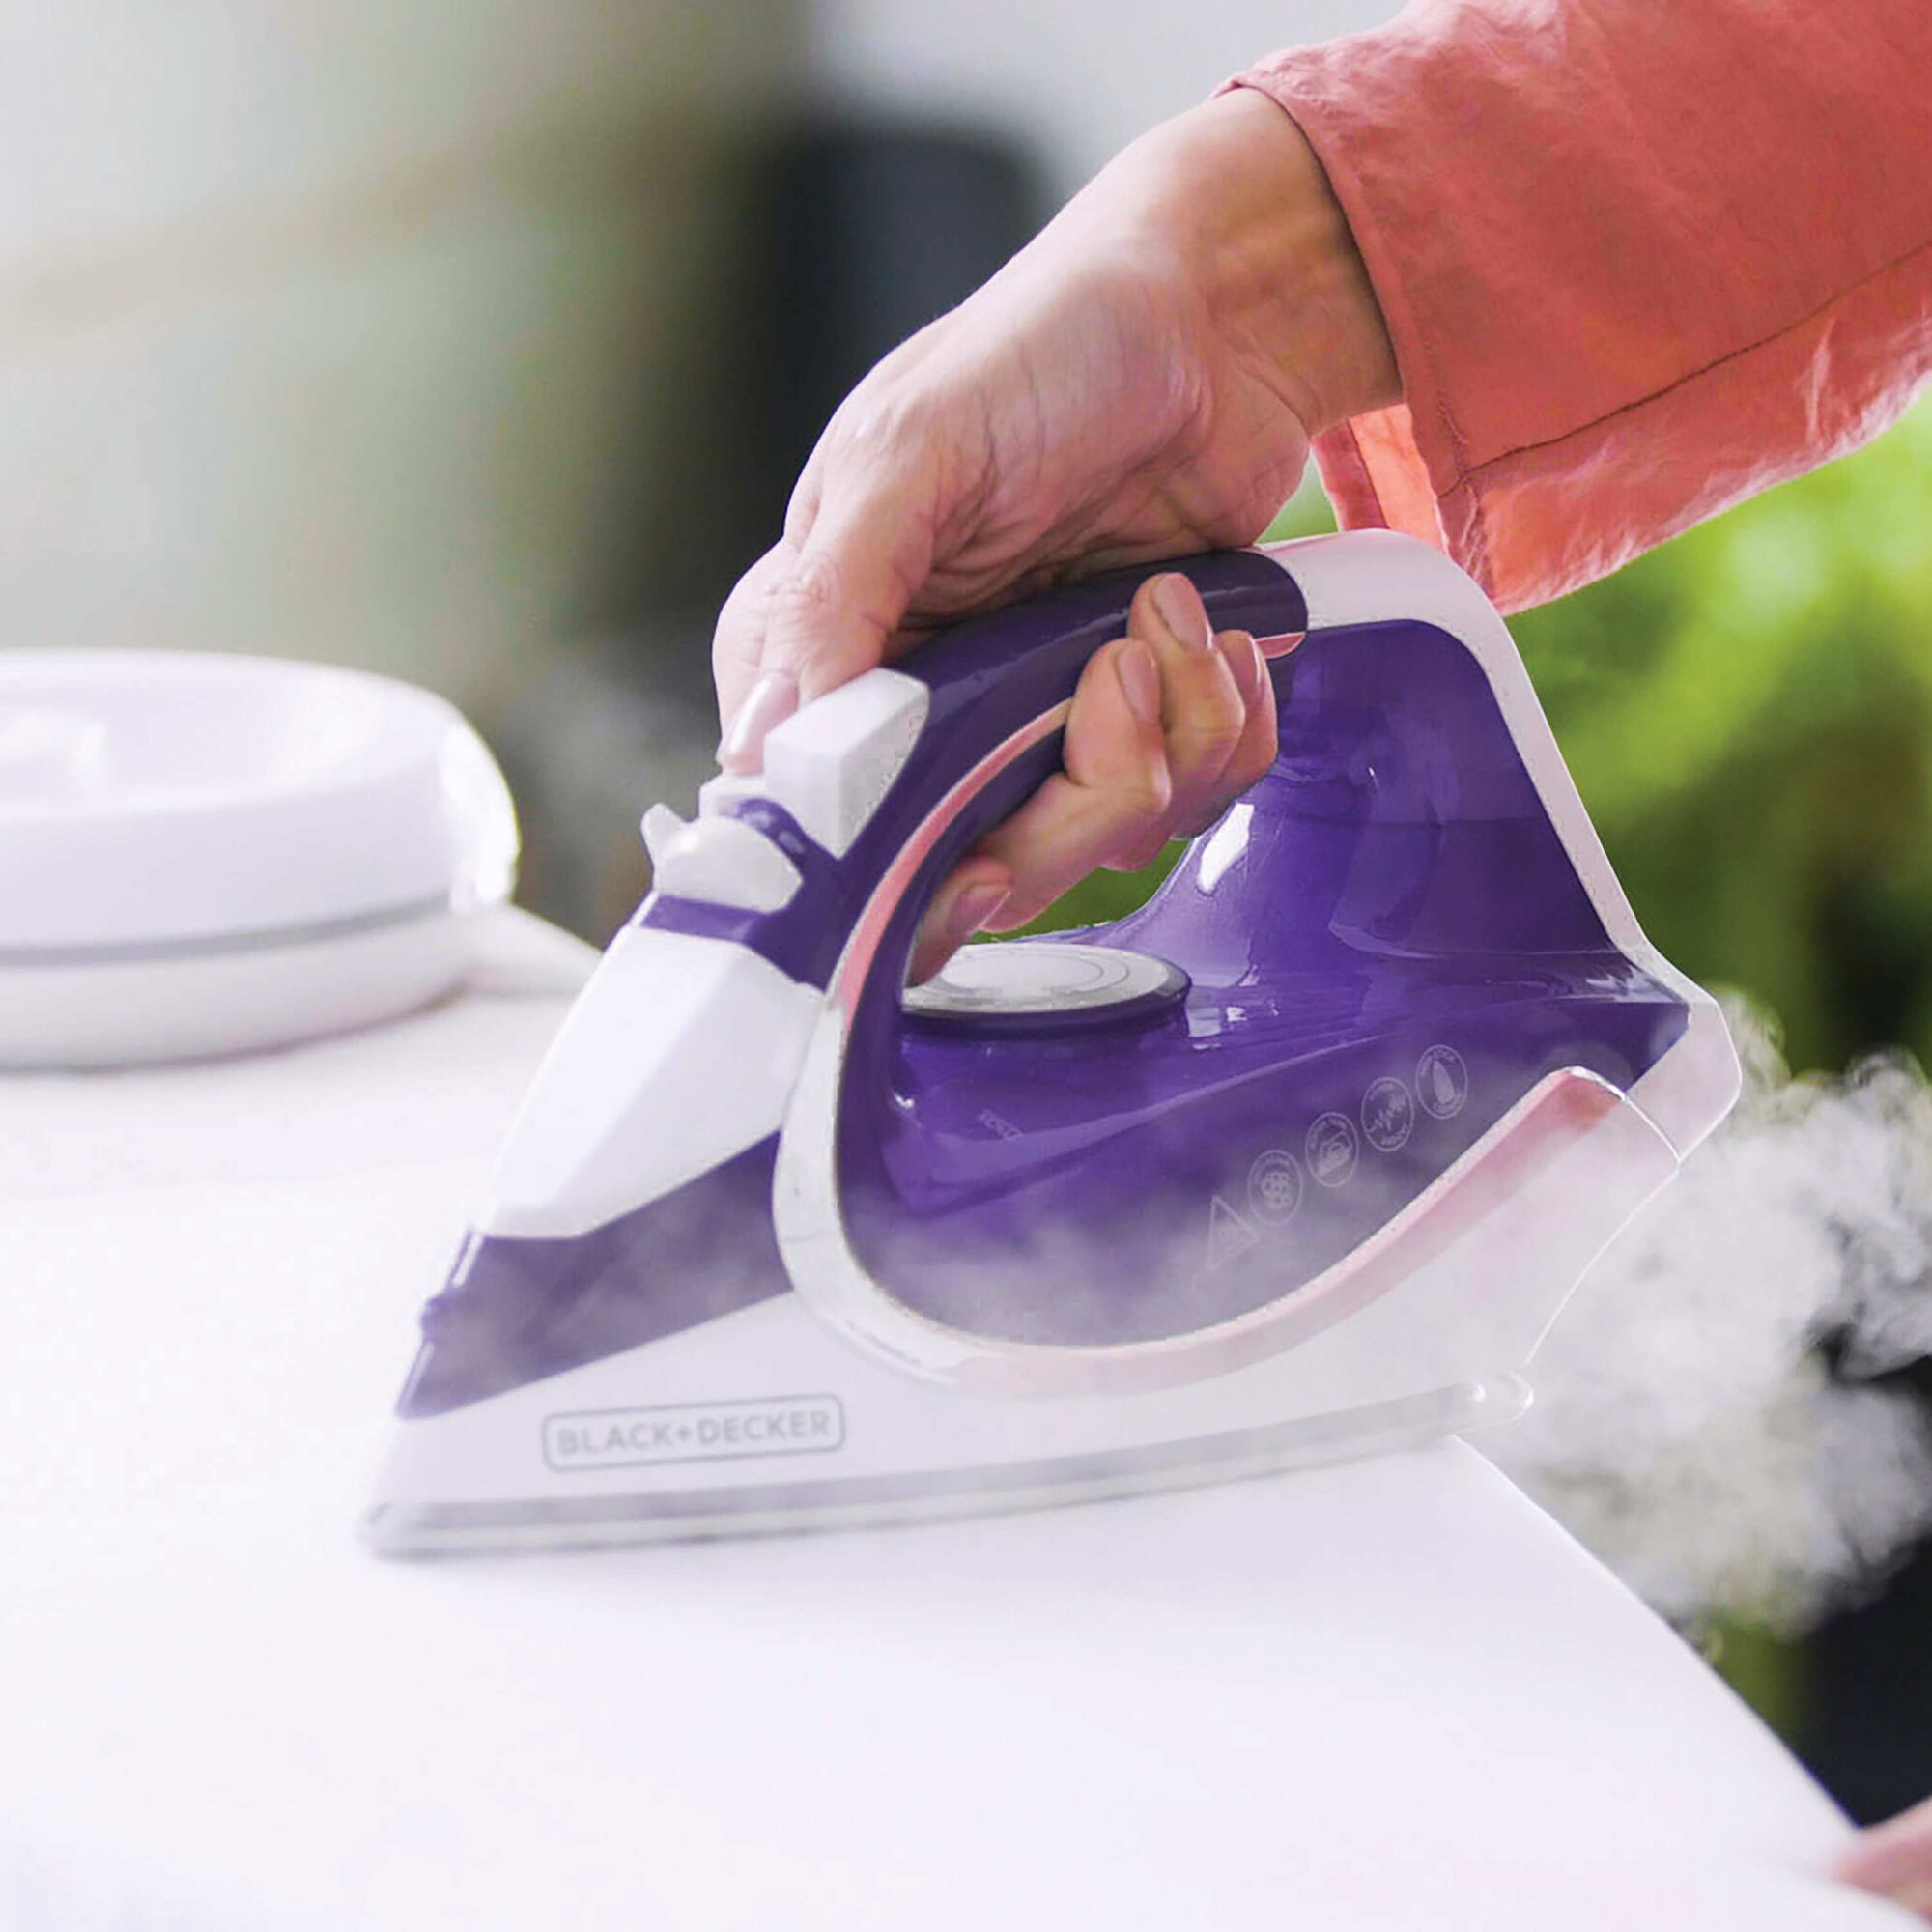 Light n go cordless iron being used to iron clothes.